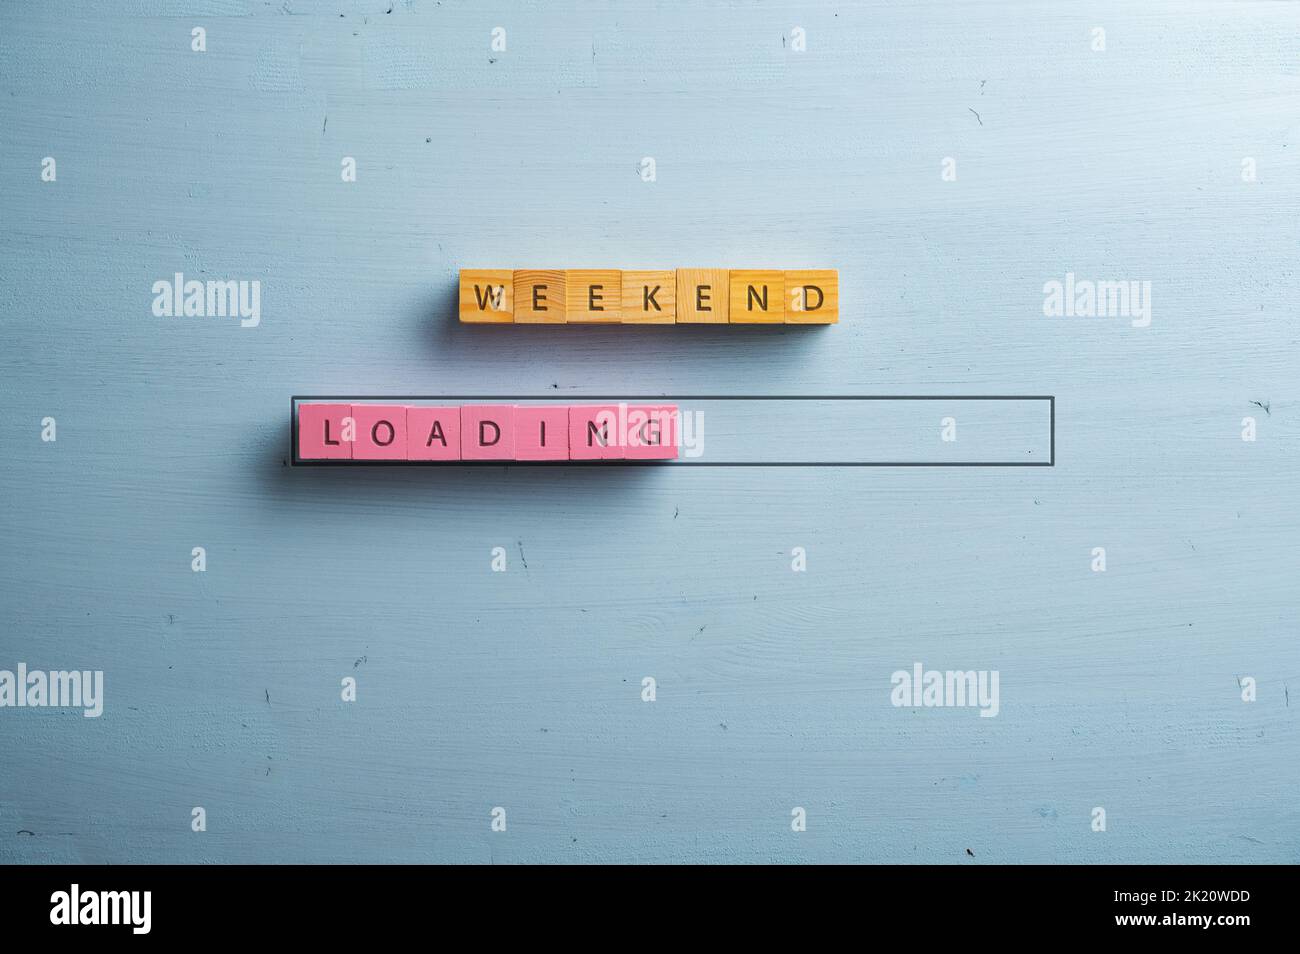 Weekend loading sign spelled on pink and brown wooden blocks in a loading bar. Over blue wooden background. Stock Photo